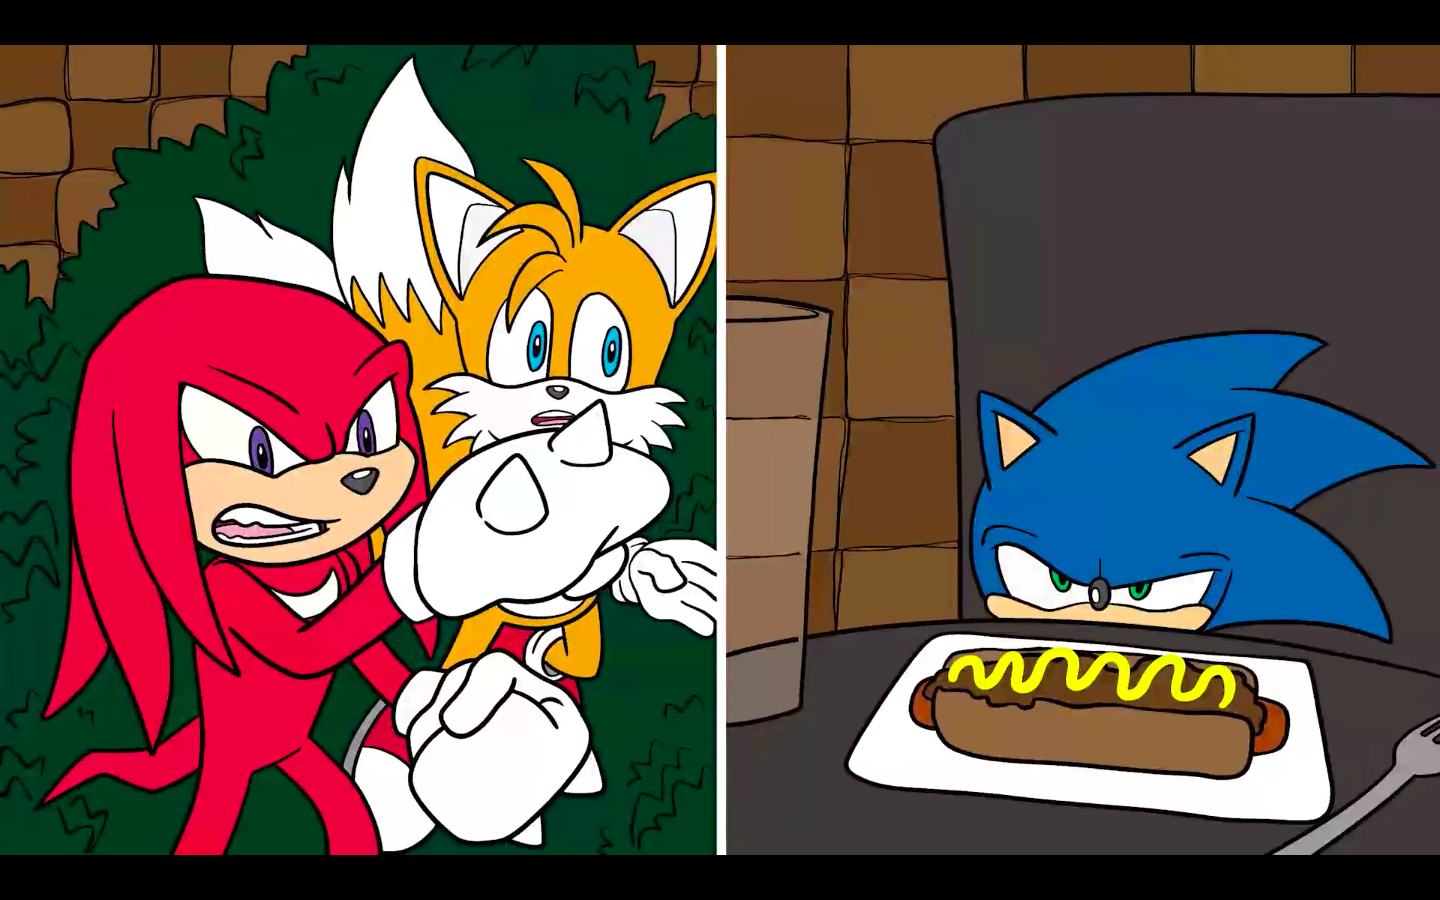 Knuckles yelling at Sonic Blank Meme Template